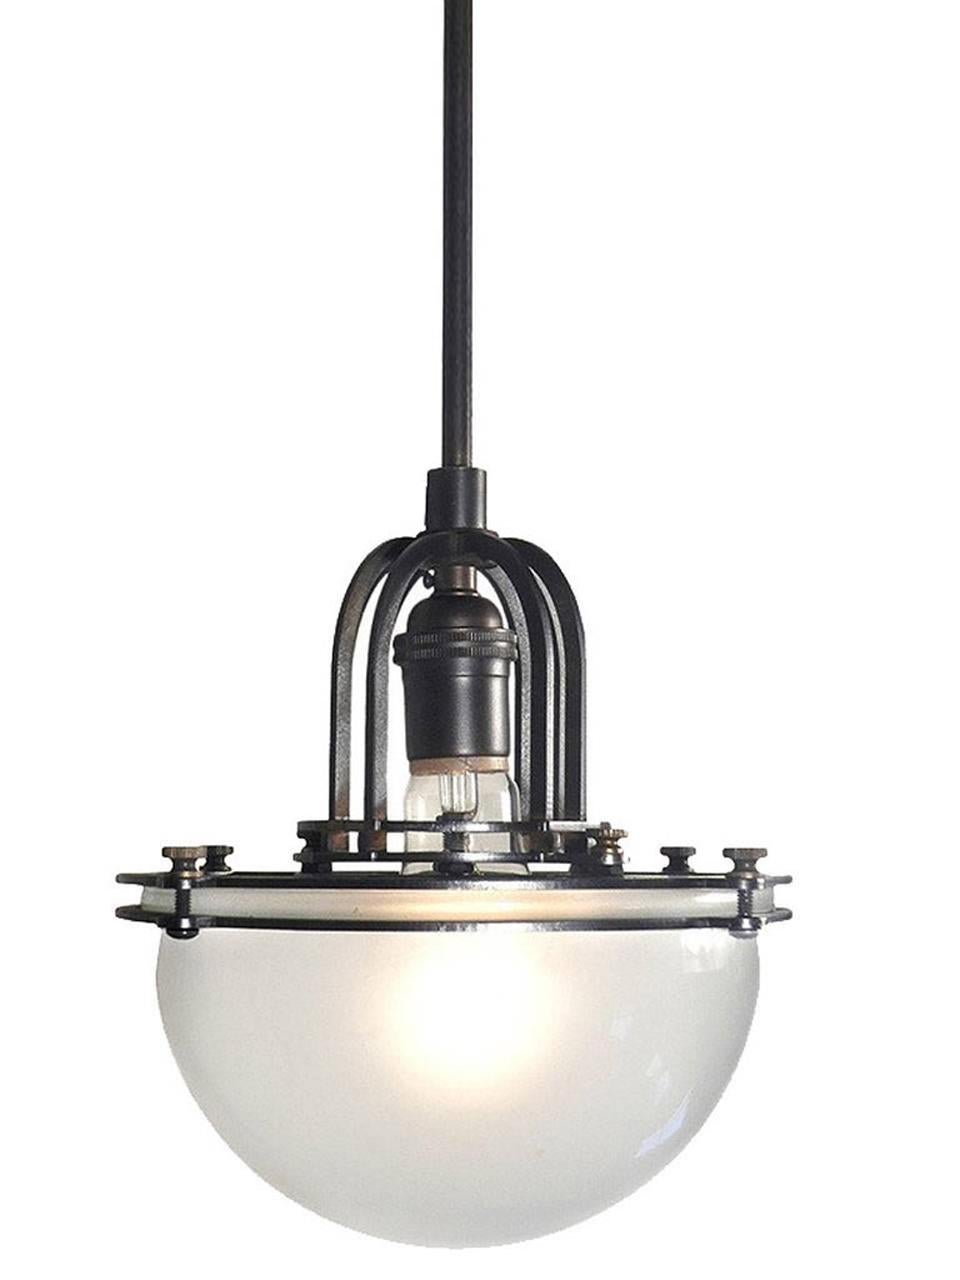 Starting with the Bauhaus style as inspiration we designed these new original pendents. The look is a bit Industrial, Machine Age with a hint Wilhelm Wagenfeld Bauhaus and the overall feel is very modern and at the same time 1920s.